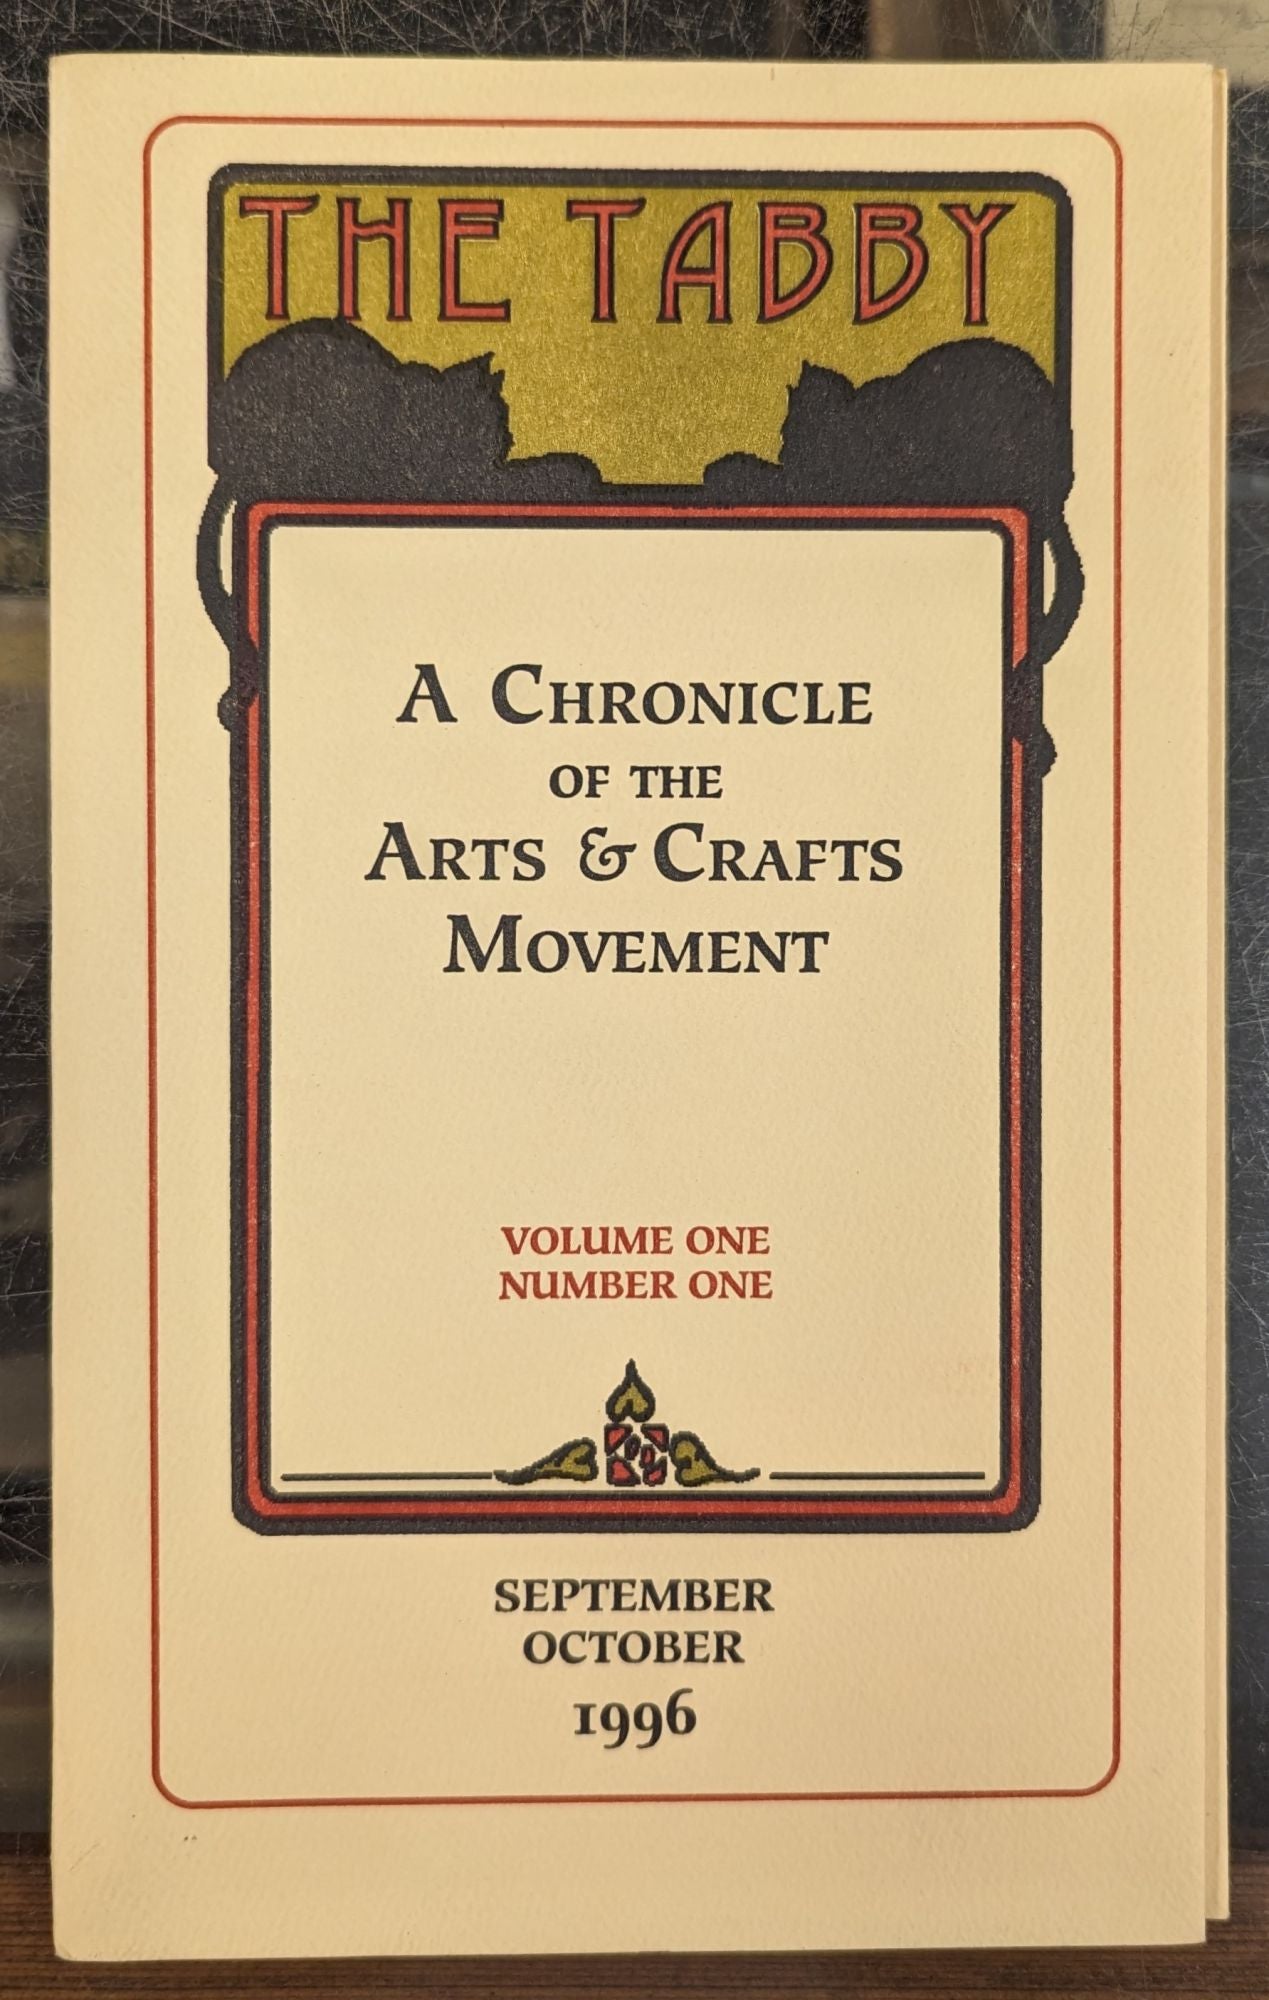 Movement,　of　October　Crafts　the　Volume　Arts　Tabby:　The　September　One,　1996　A　One,　Chronicle　Number